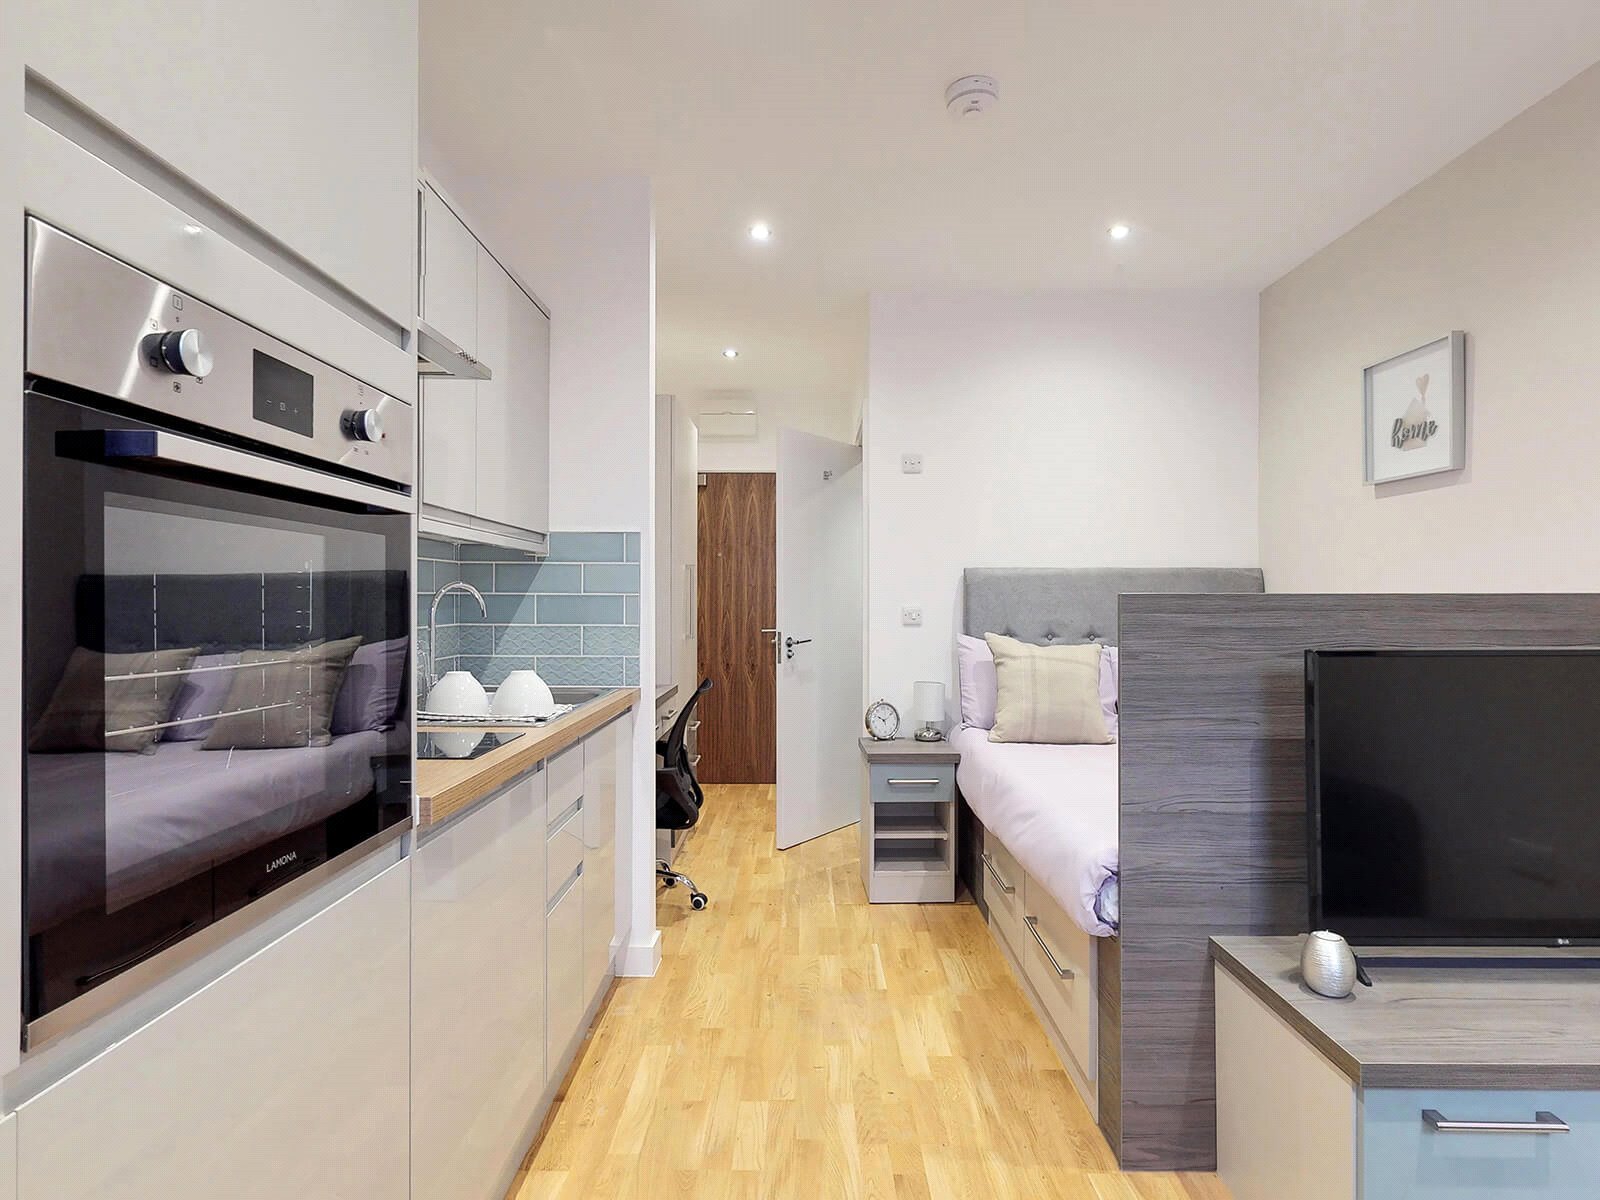 0 bed apartment for rent in Sheffield. From YPP - Sheffield